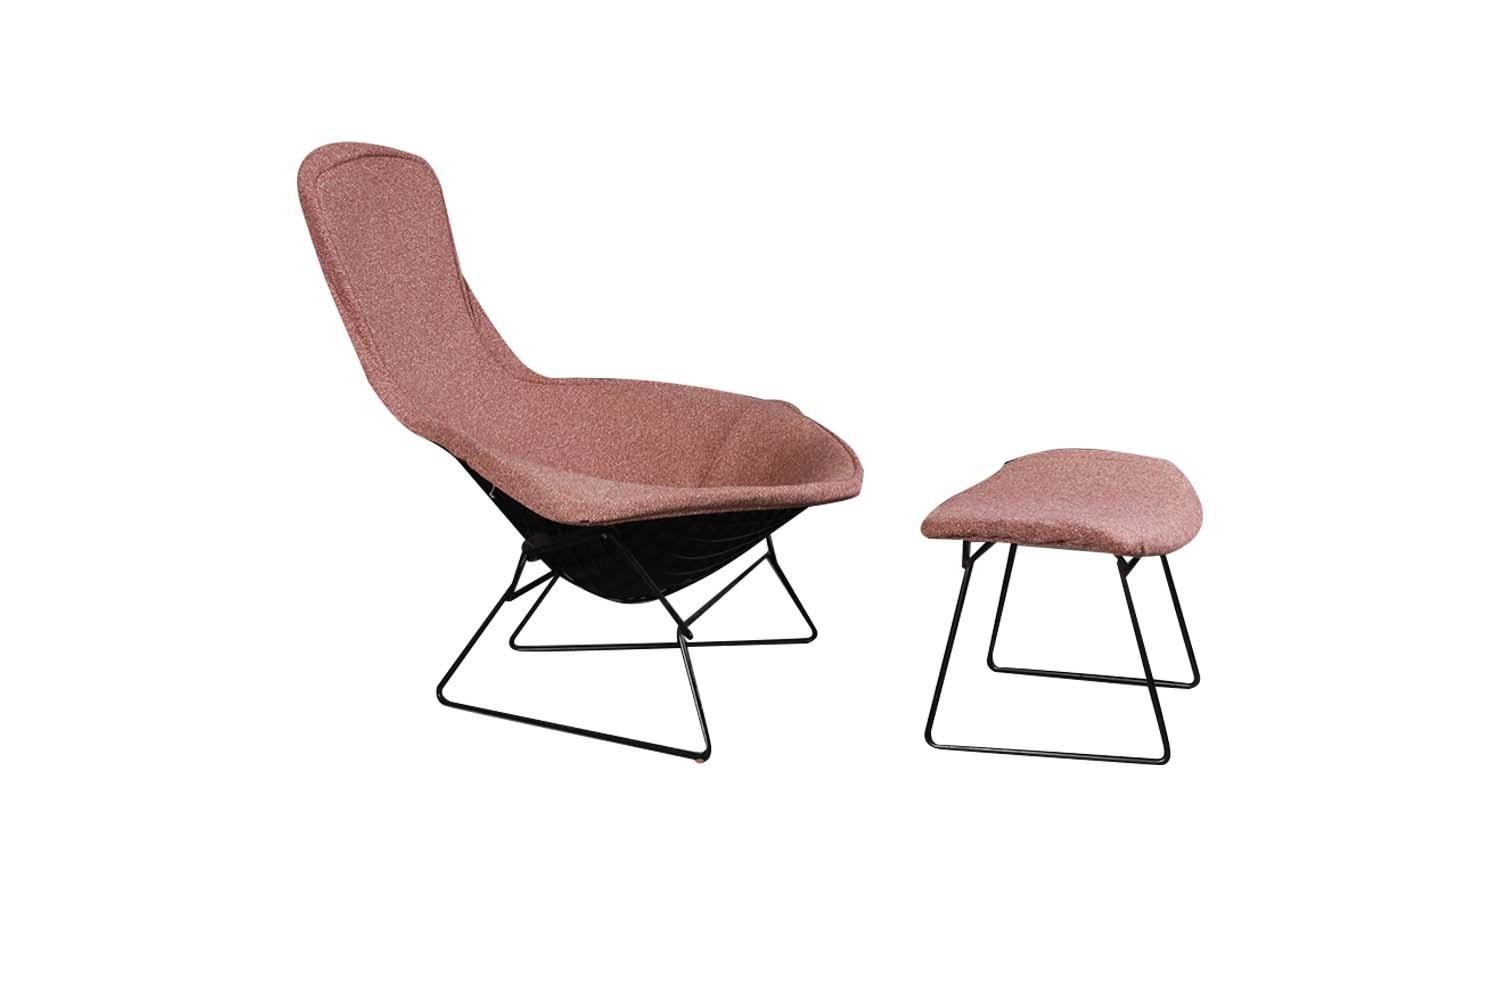 A beautiful Mid-Century Modern, stylish high back, bird lounge chair and ottoman designed by Harry Bertoia circa 1960s for Knoll. Features a stunning profile, with stylish wing-like arms, high back sculptural form, black enameled welded steel rod